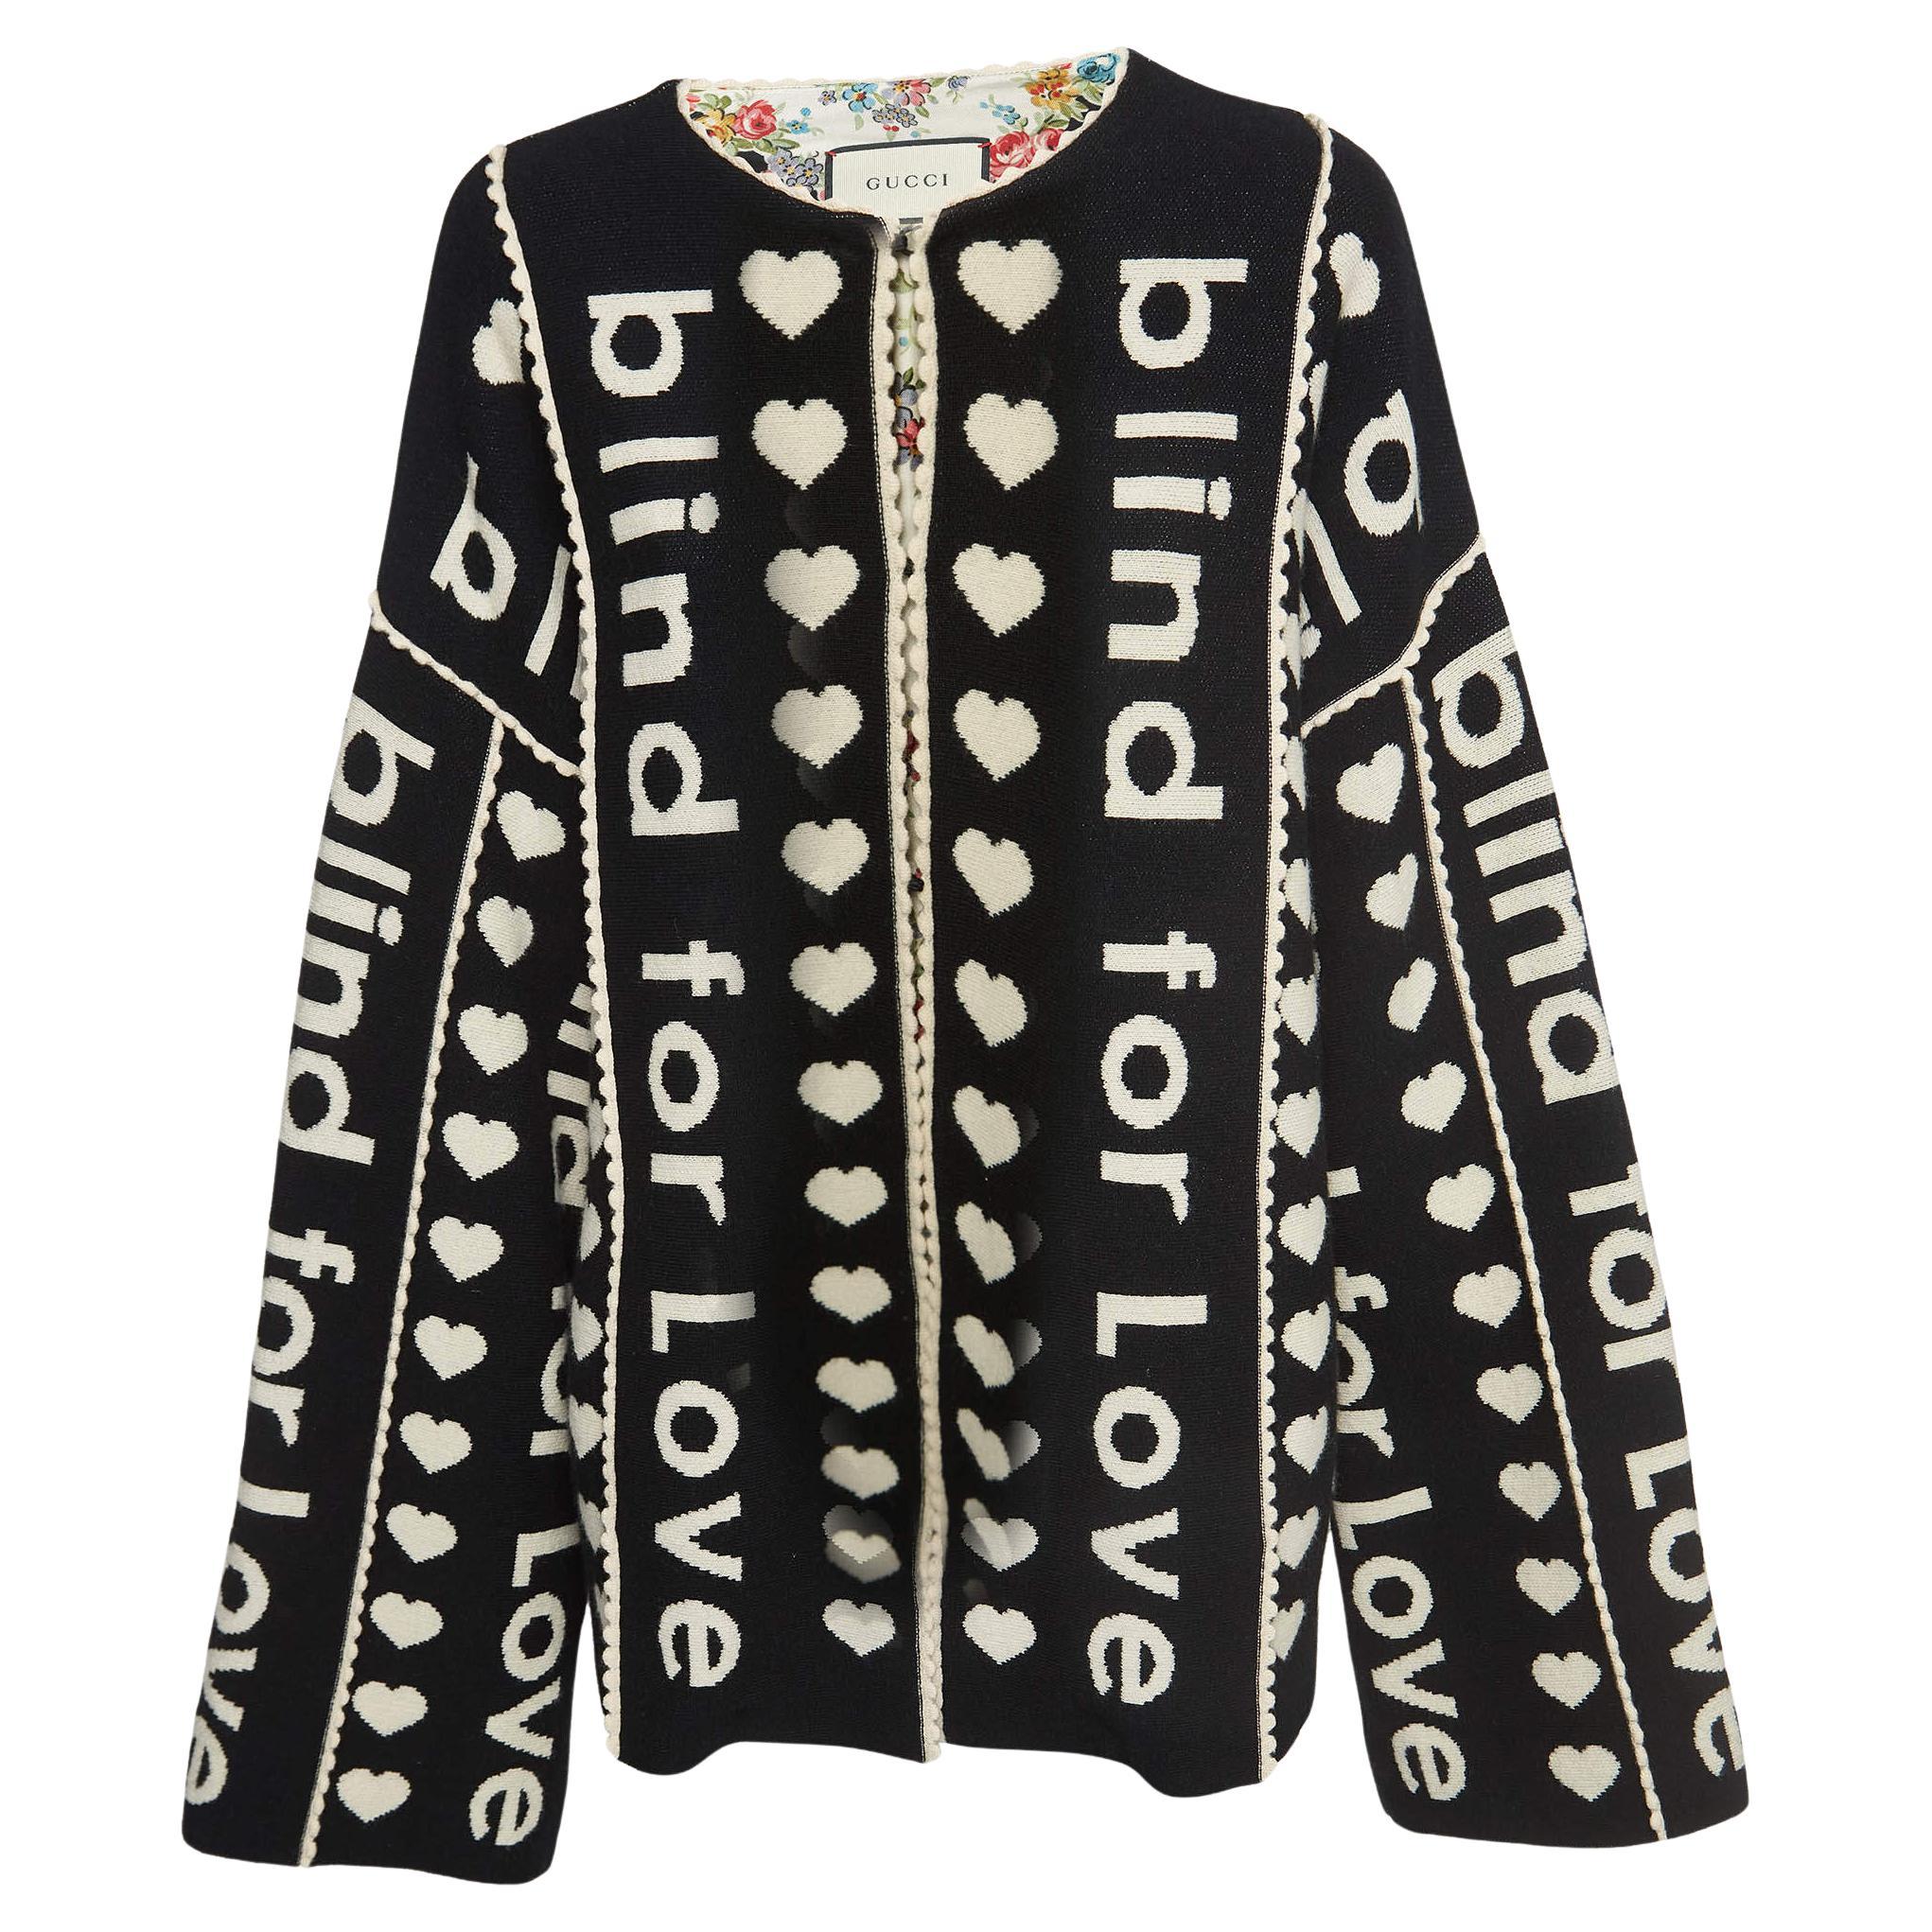 Gucci Black 'Blind for Love' Jacquard Knit Oversized Coat One Size For Sale